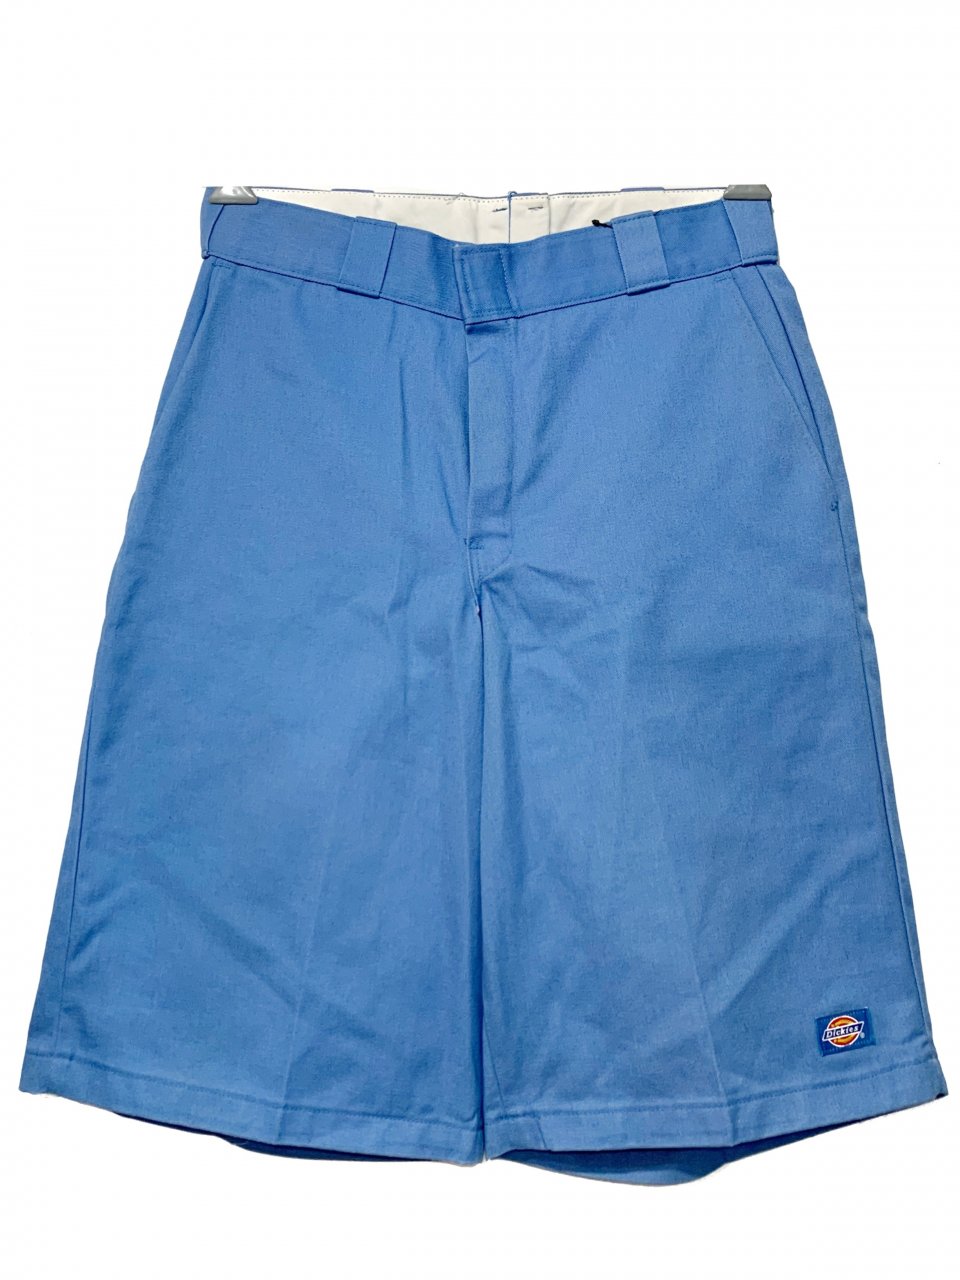 USA製 s Dickies Work Shorts 水色  ディッキーズ ワーク